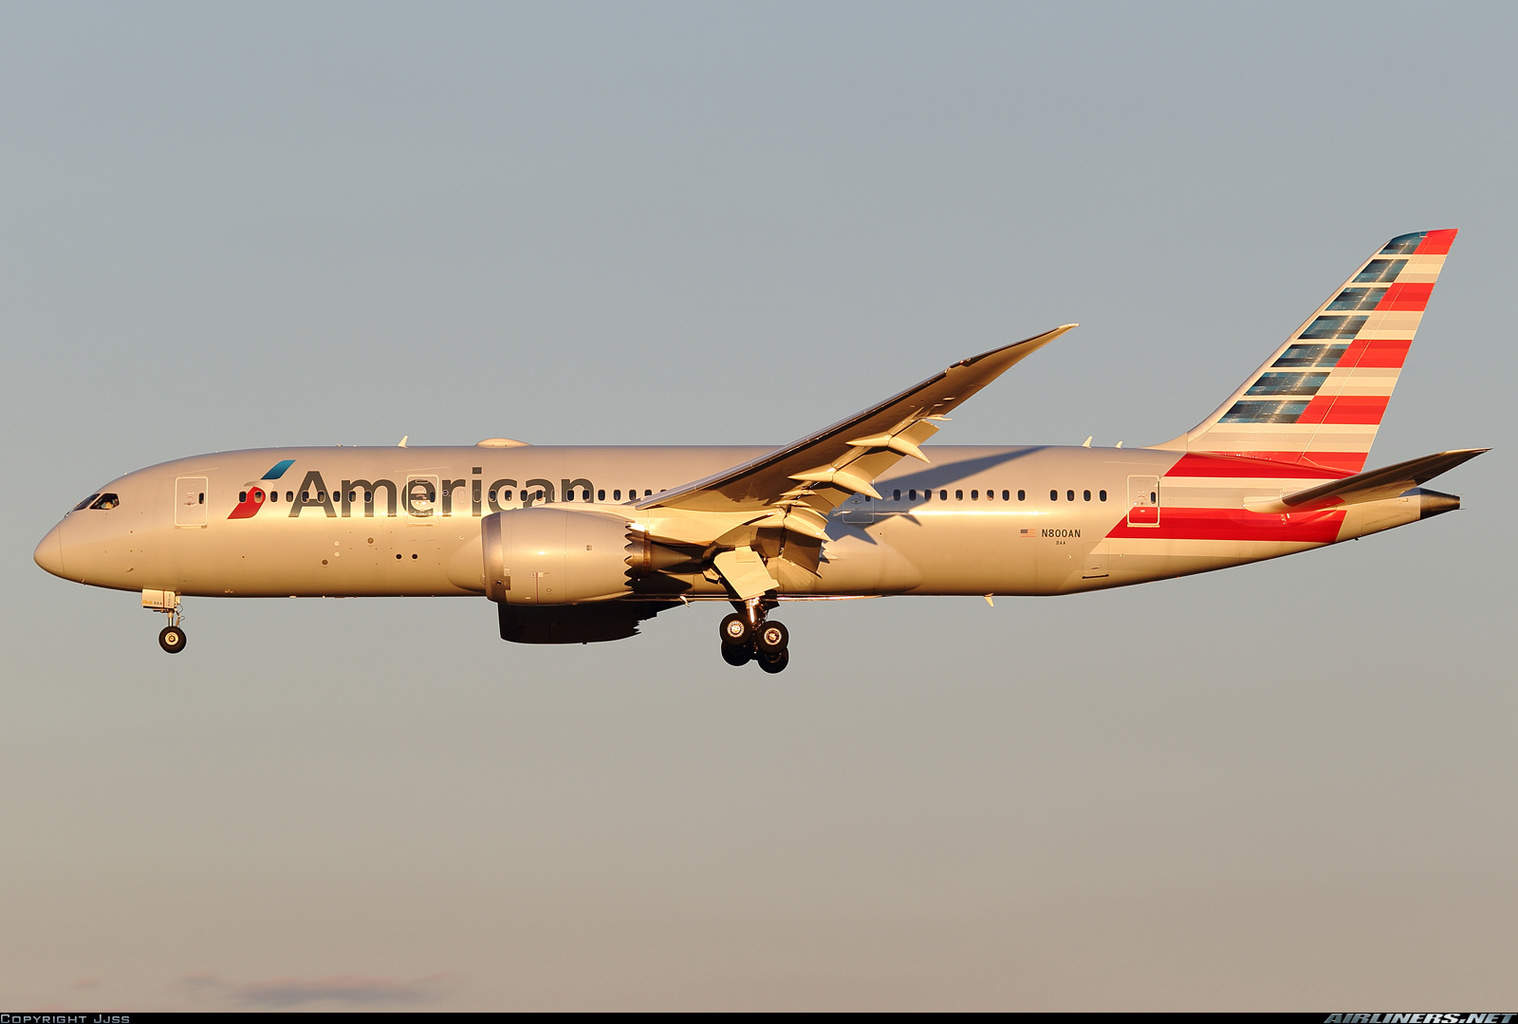 A year in the life of an American Airlines Dreamliner (N800AN)